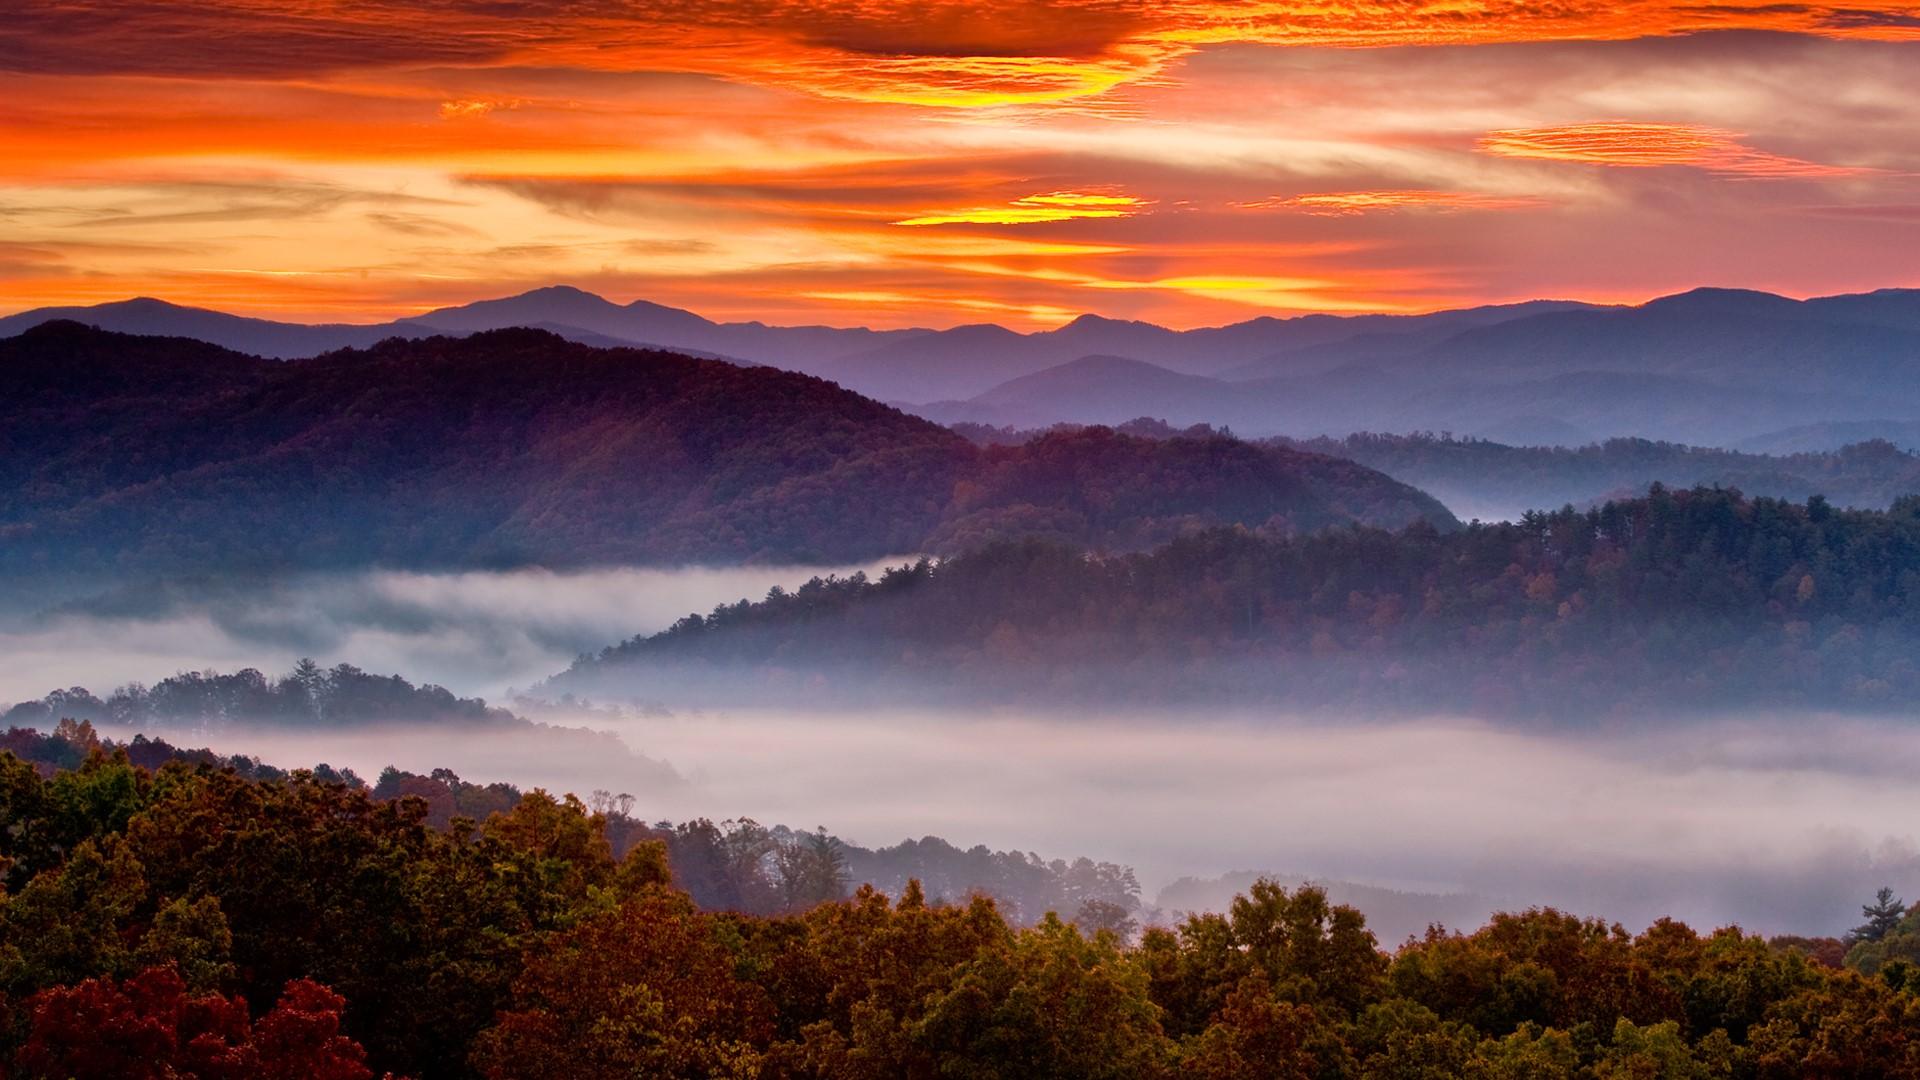 Sunrise over the Smoky Mountains in autumn from the Foothills